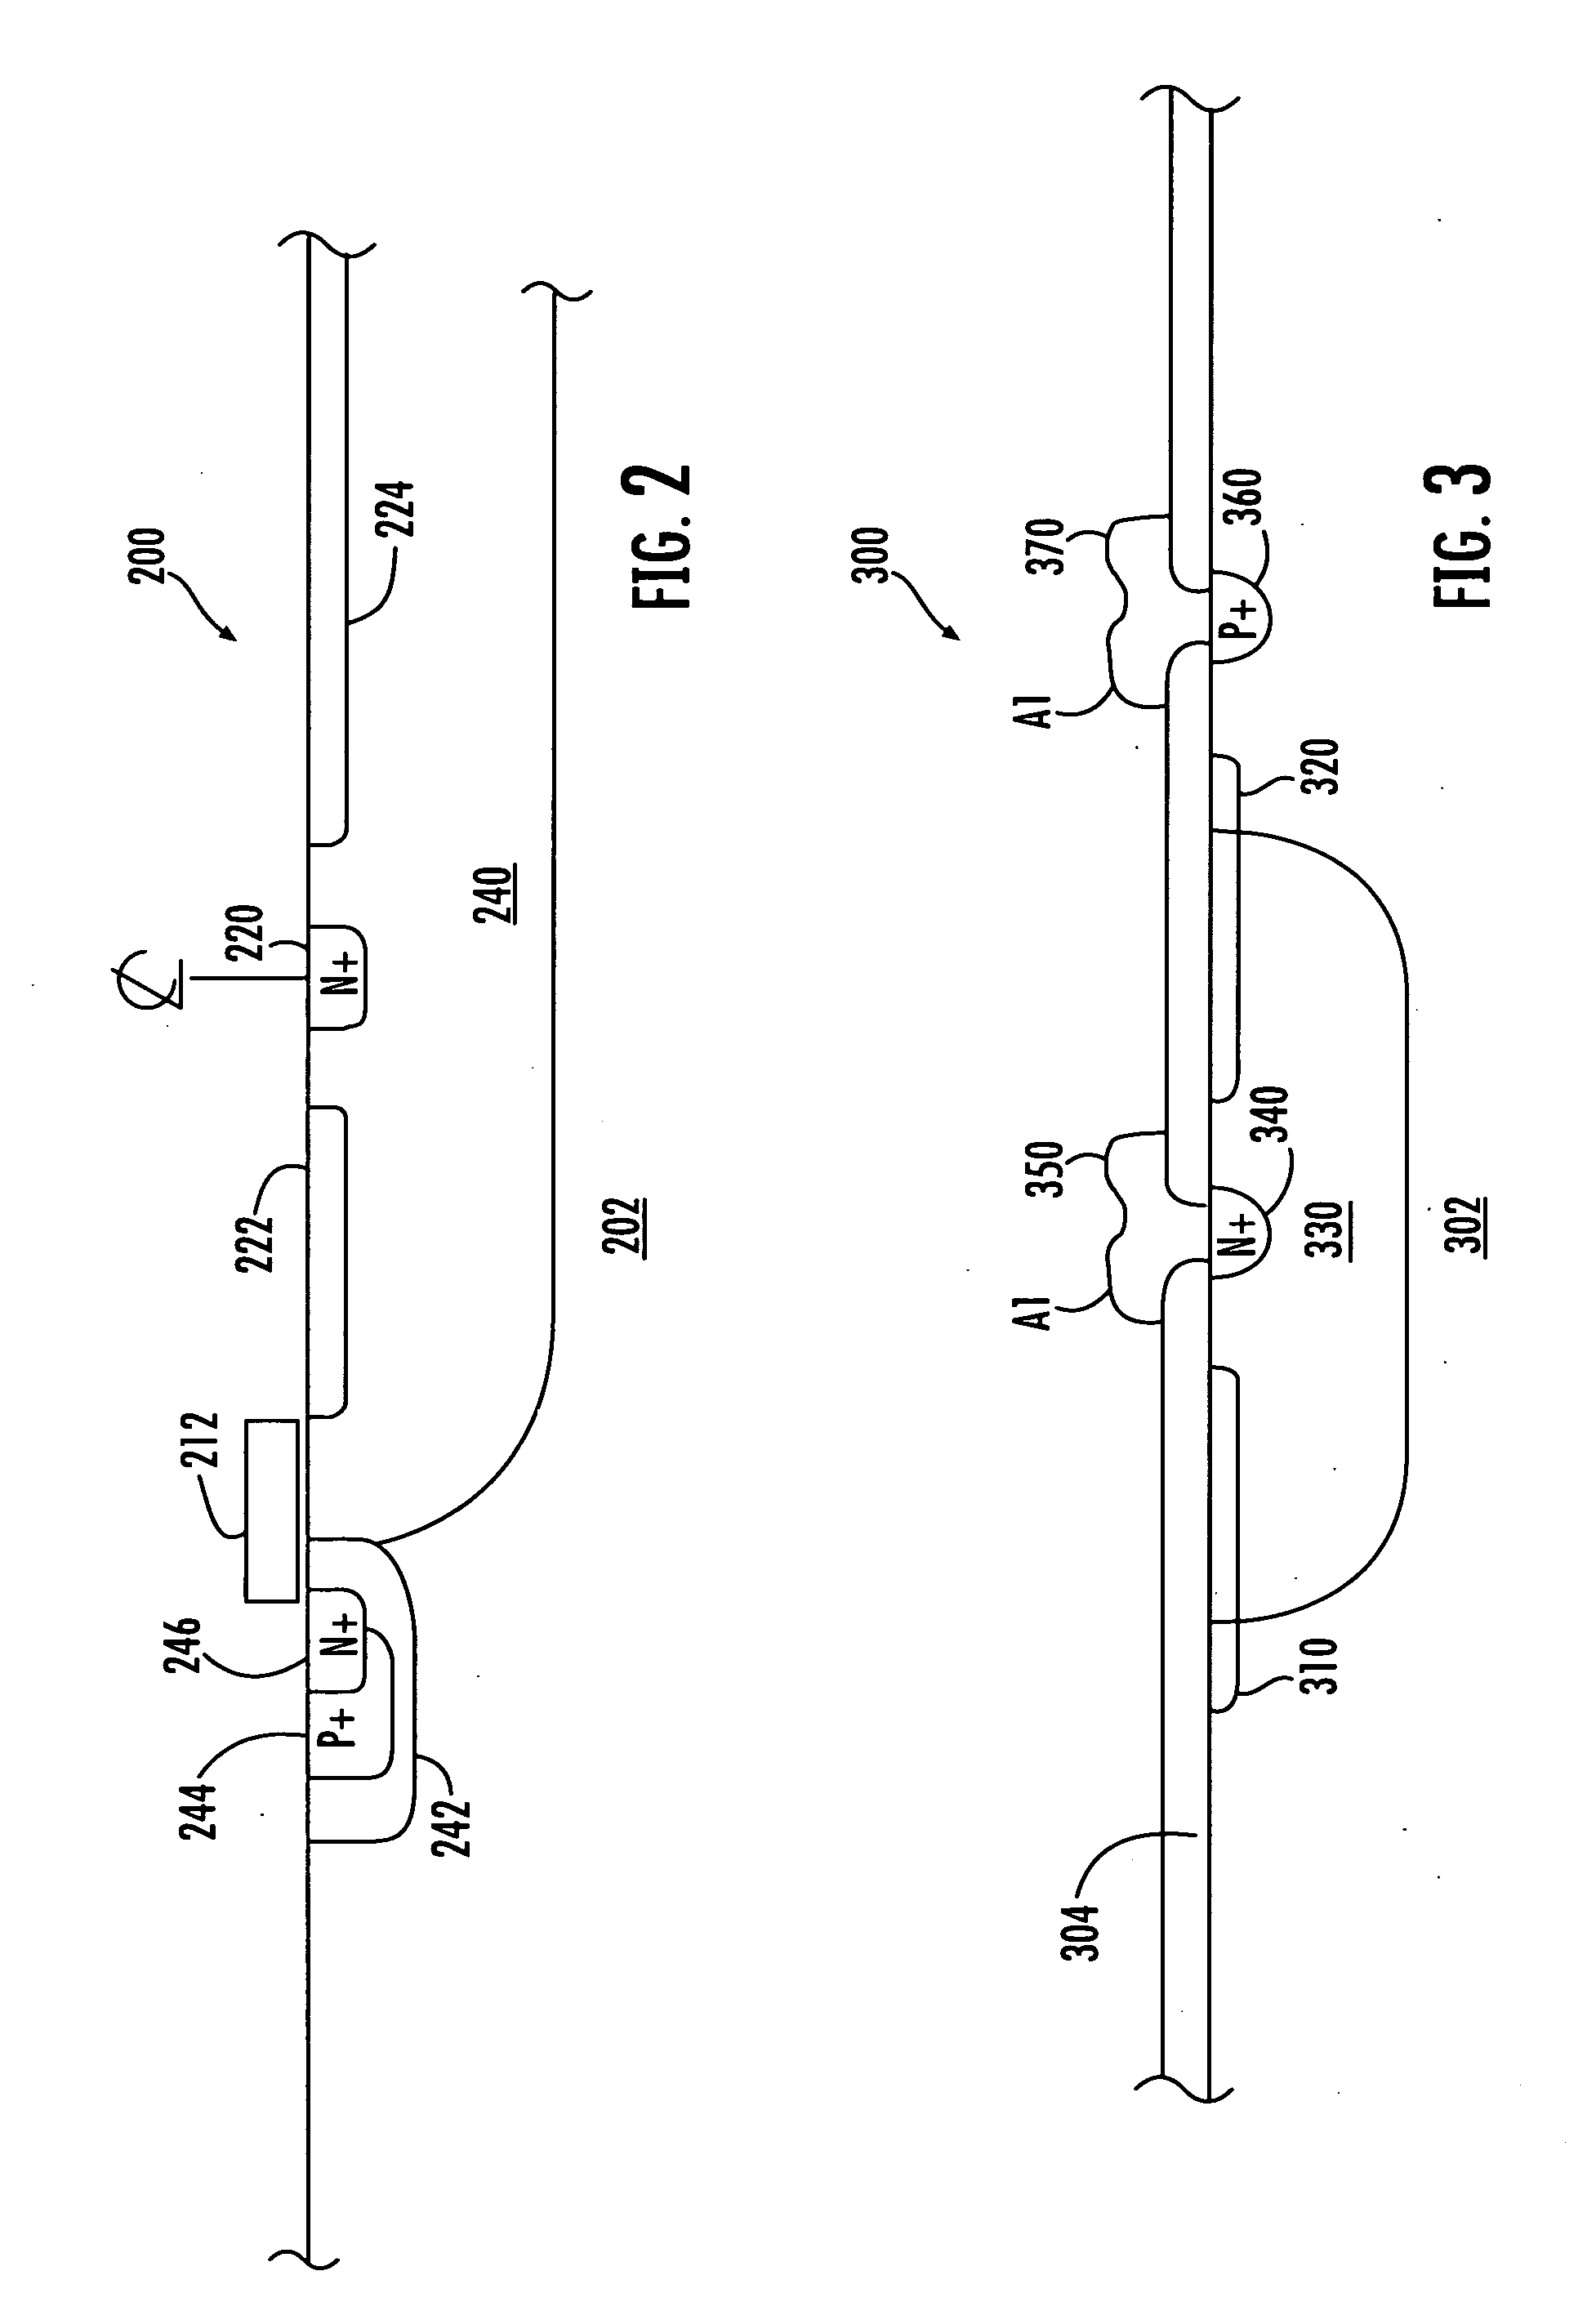 Depletable cathode low charge storage diode